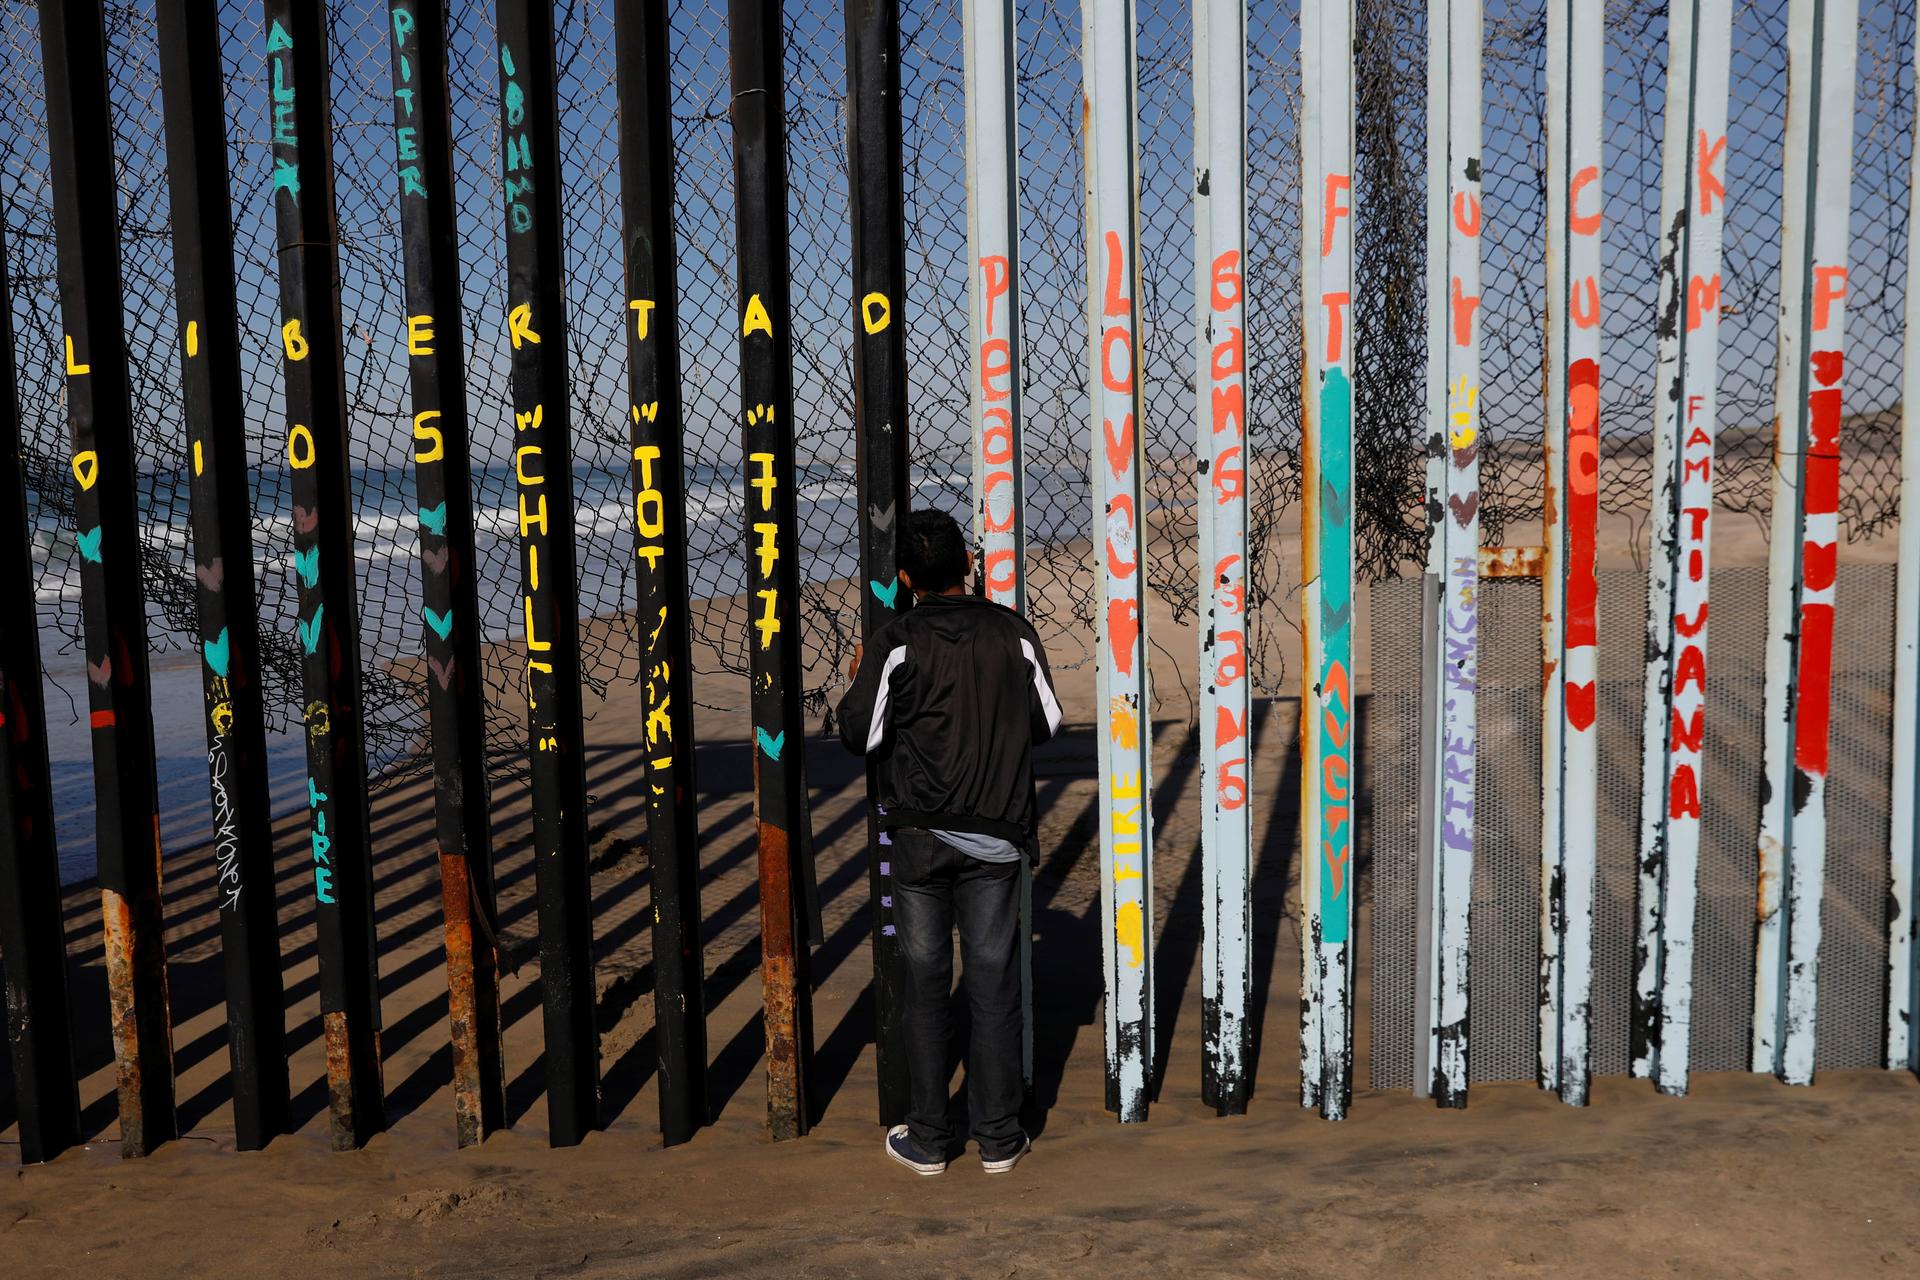 A boy looks through the slats of the US-Mexico border fence at Friendship Park in Tijuana, Mexico.